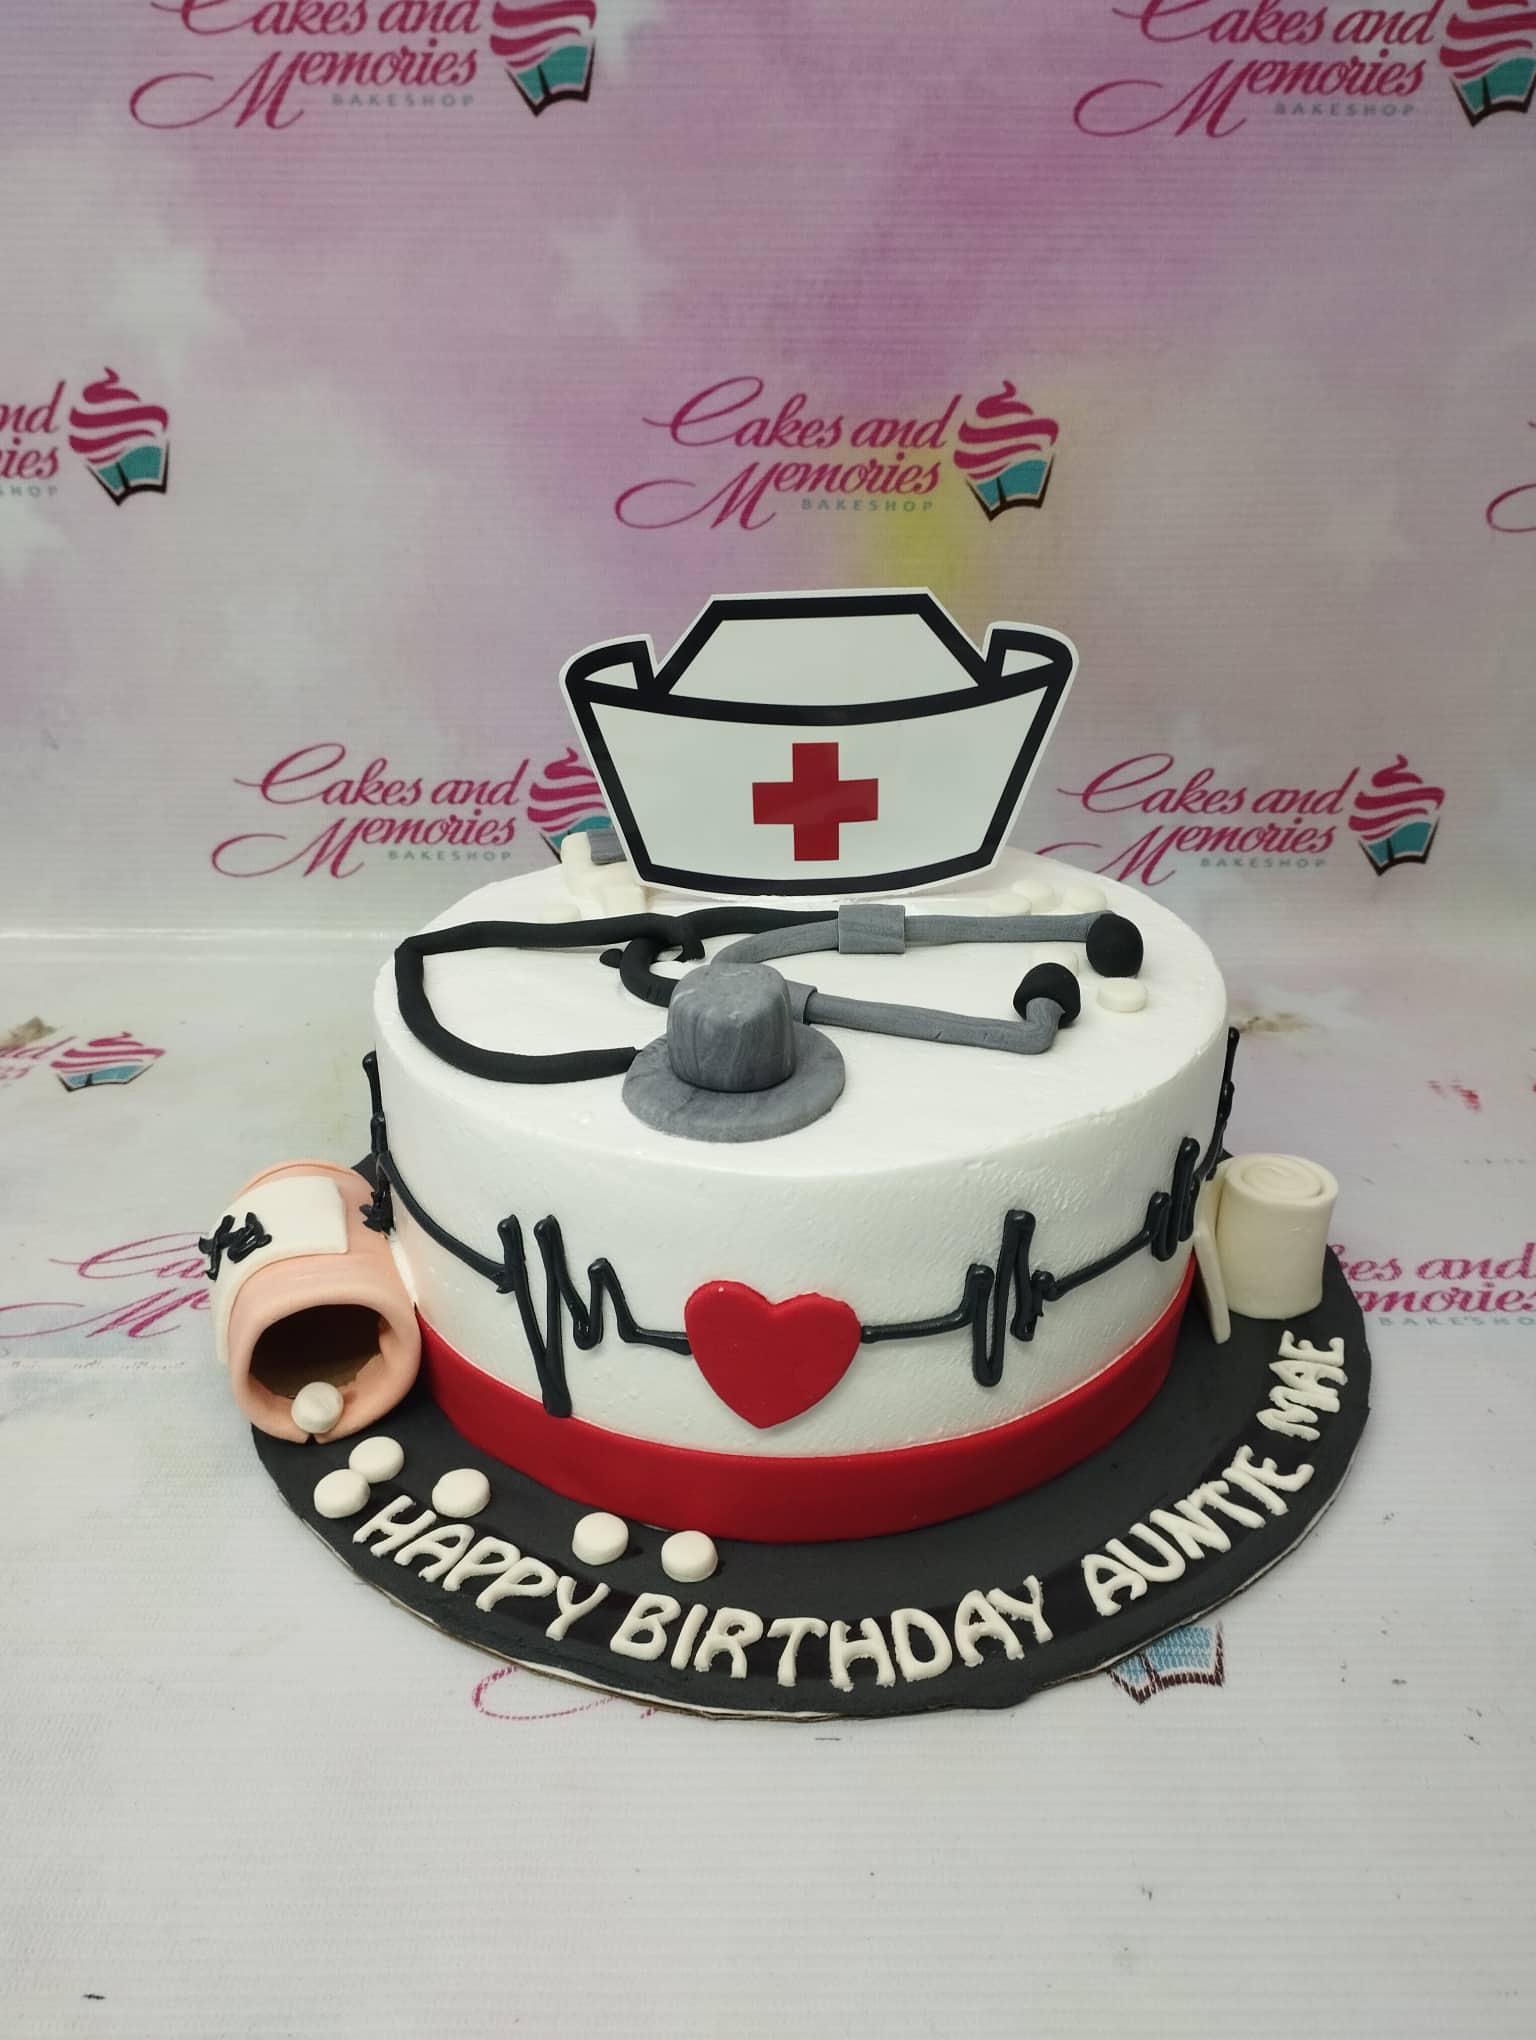 Healthcare Cake - 1117 – Cakes and Memories Bakeshop